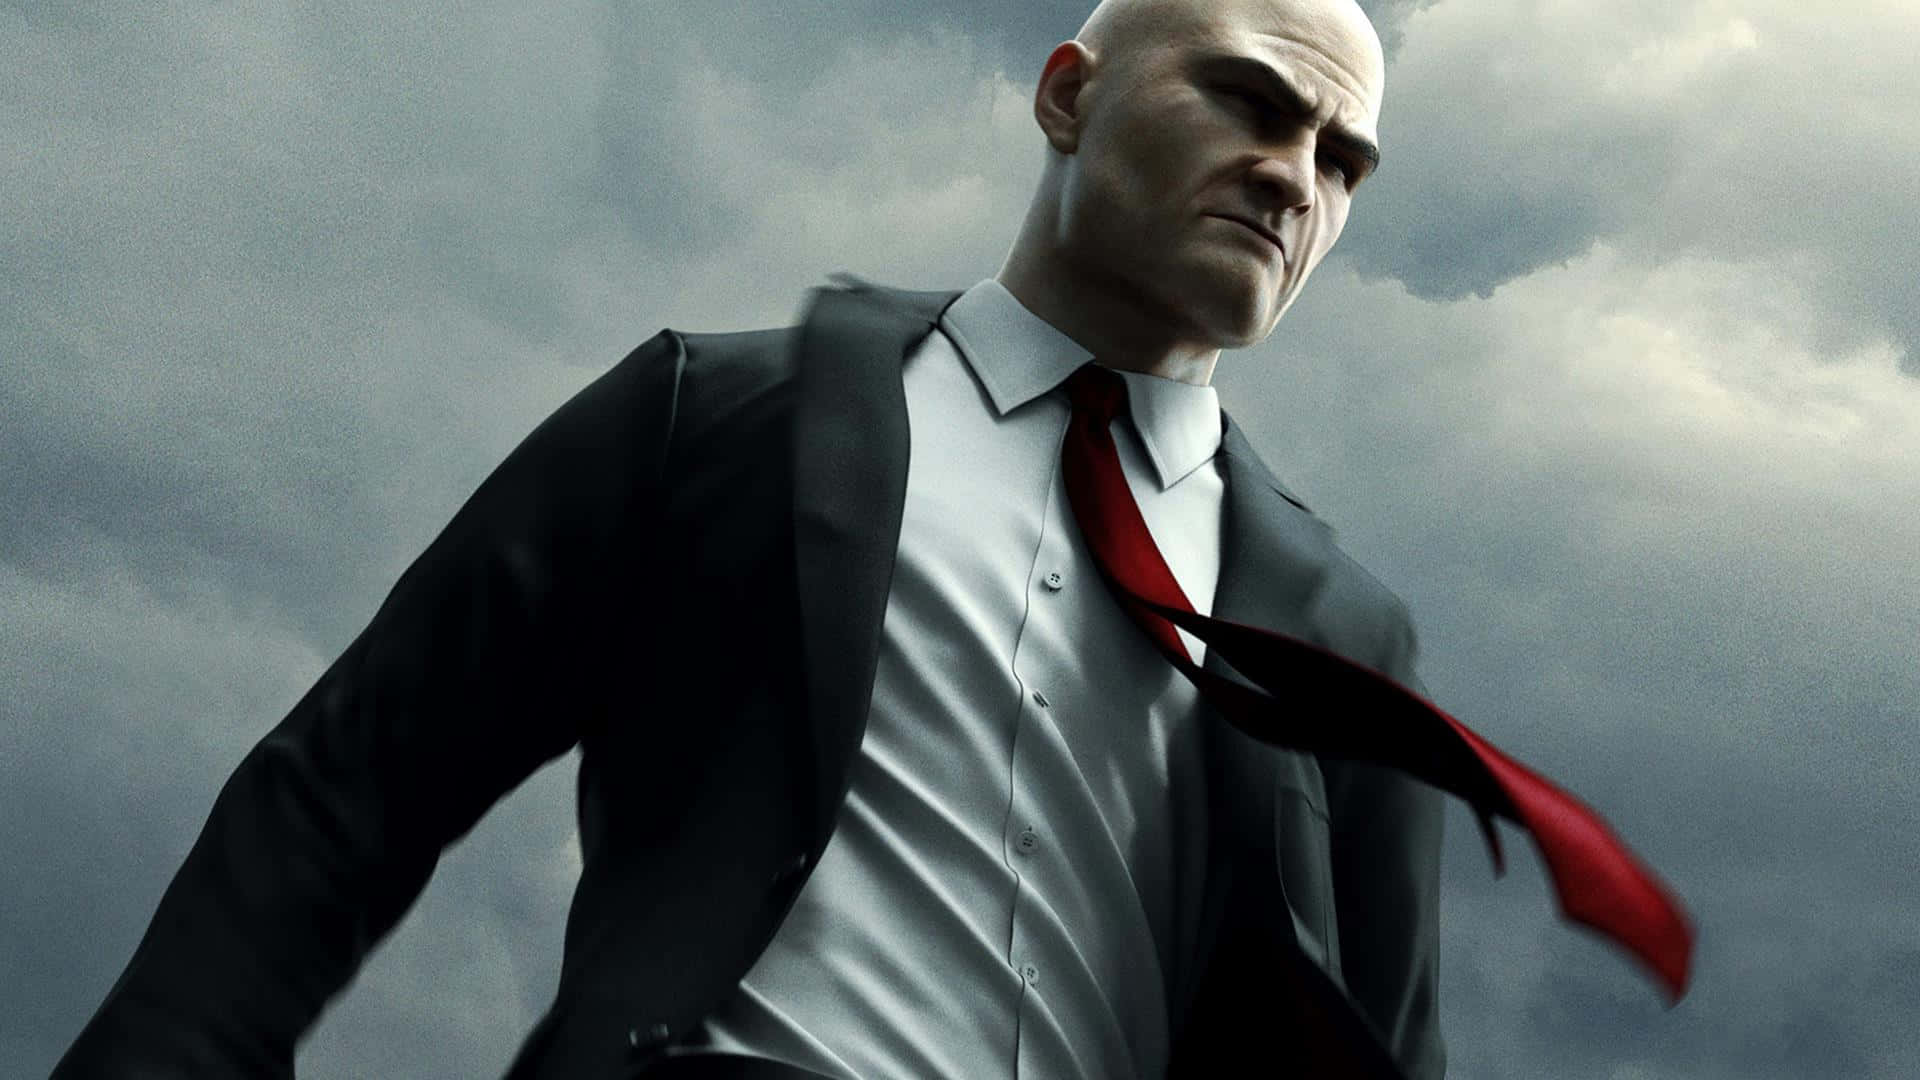 Professional assassin Agent 47 at the scene of a crime.